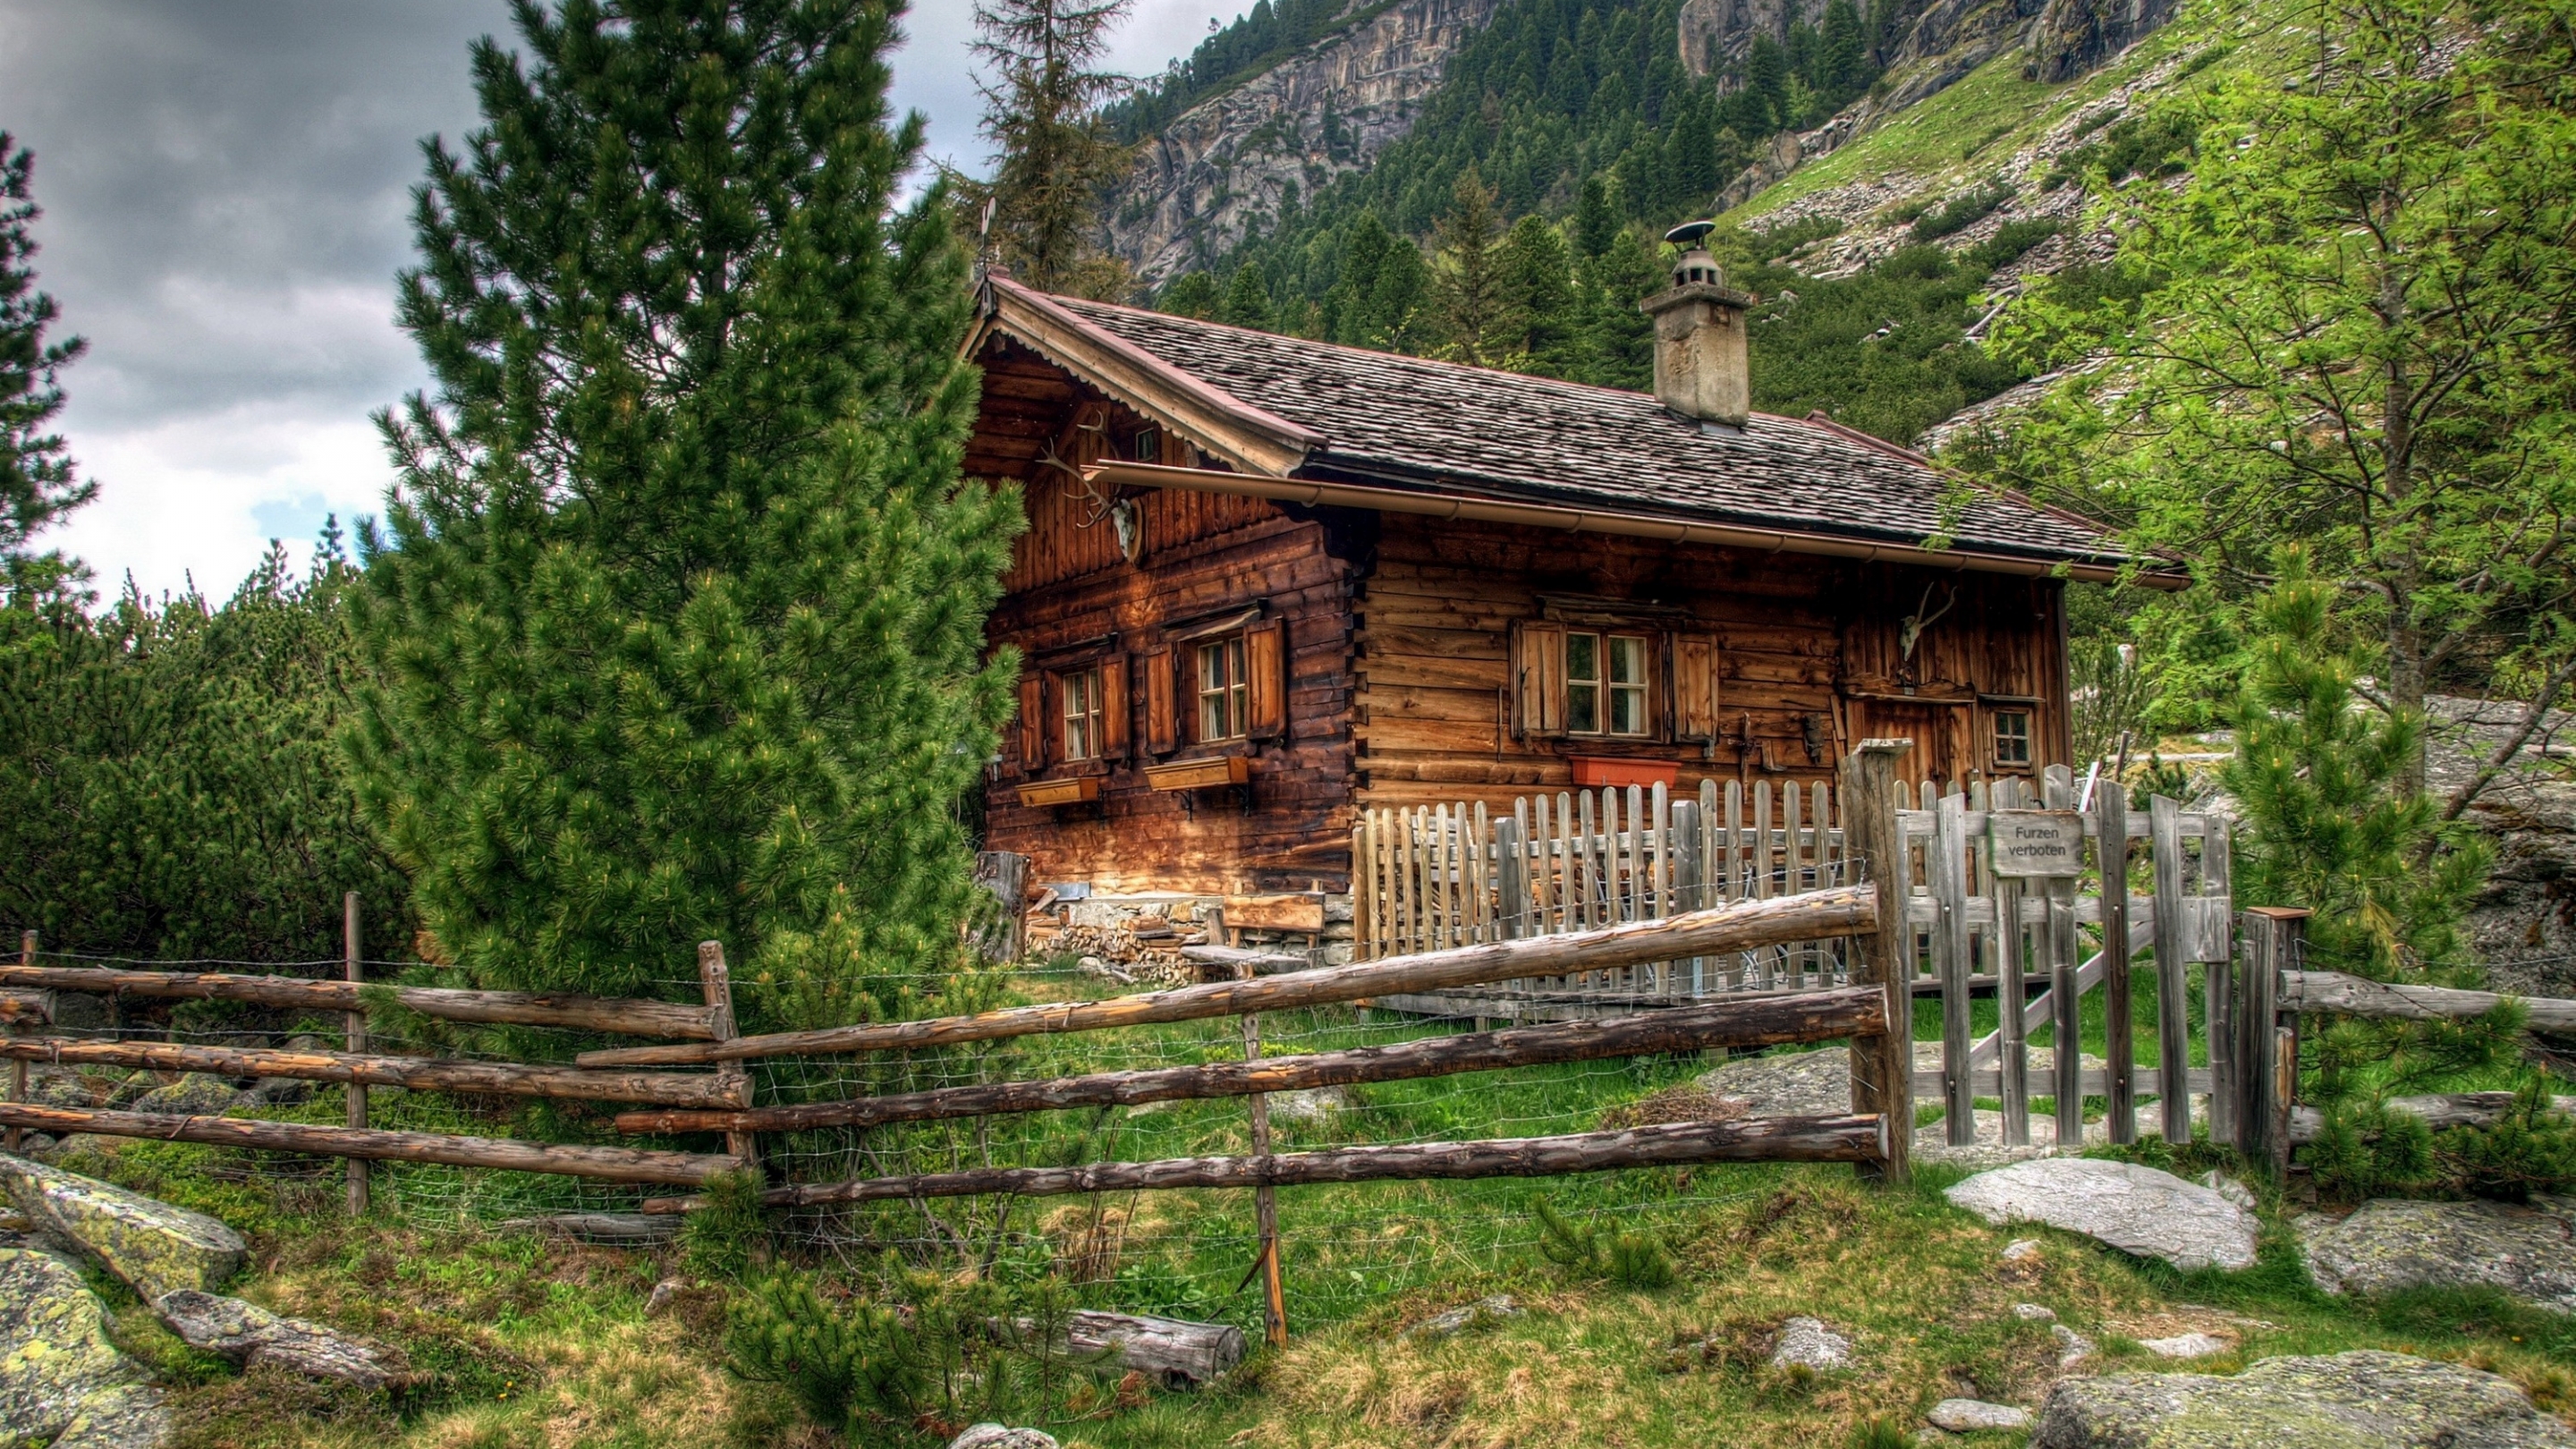 Download Cabin wallpaper for mobile phone, free Cabin HD picture